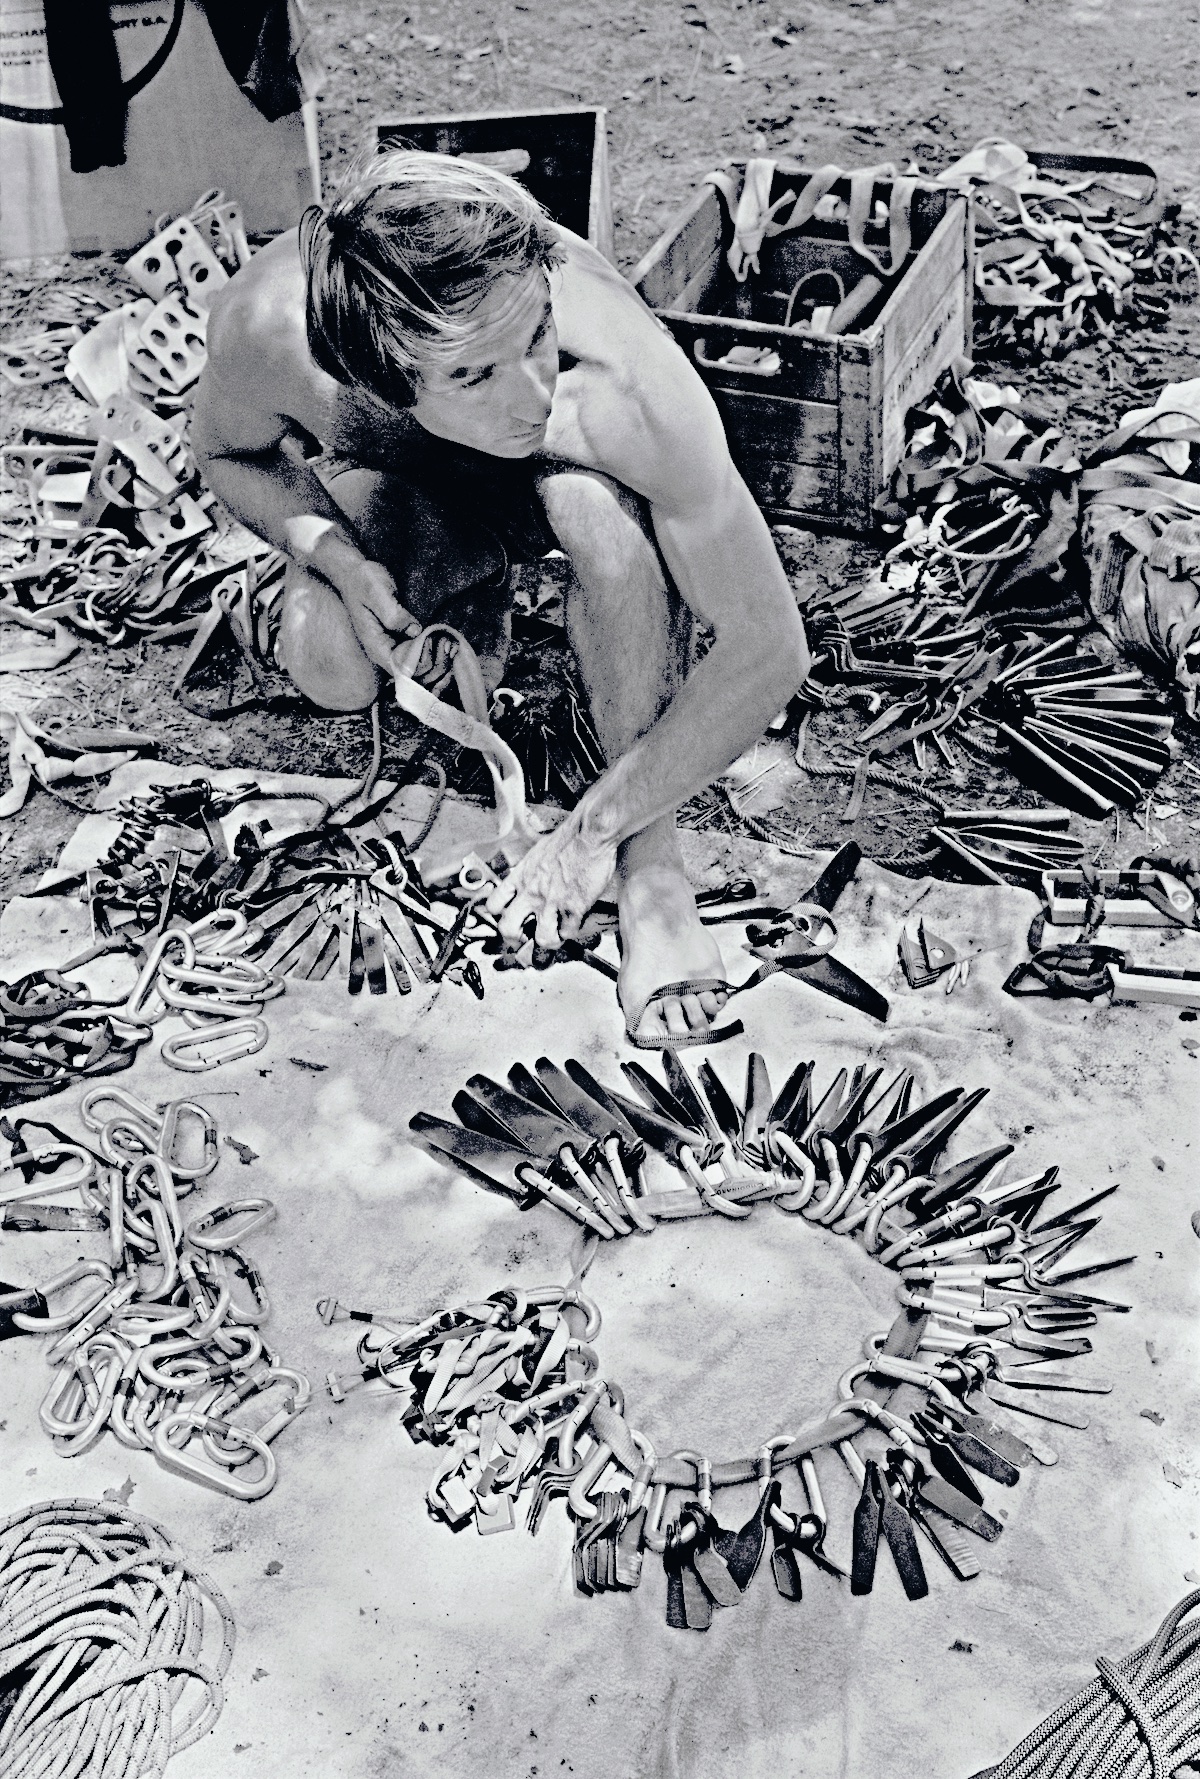 Black and white photo Yvon Chouinard squatting with an organized circle of climbing pitons in front of him